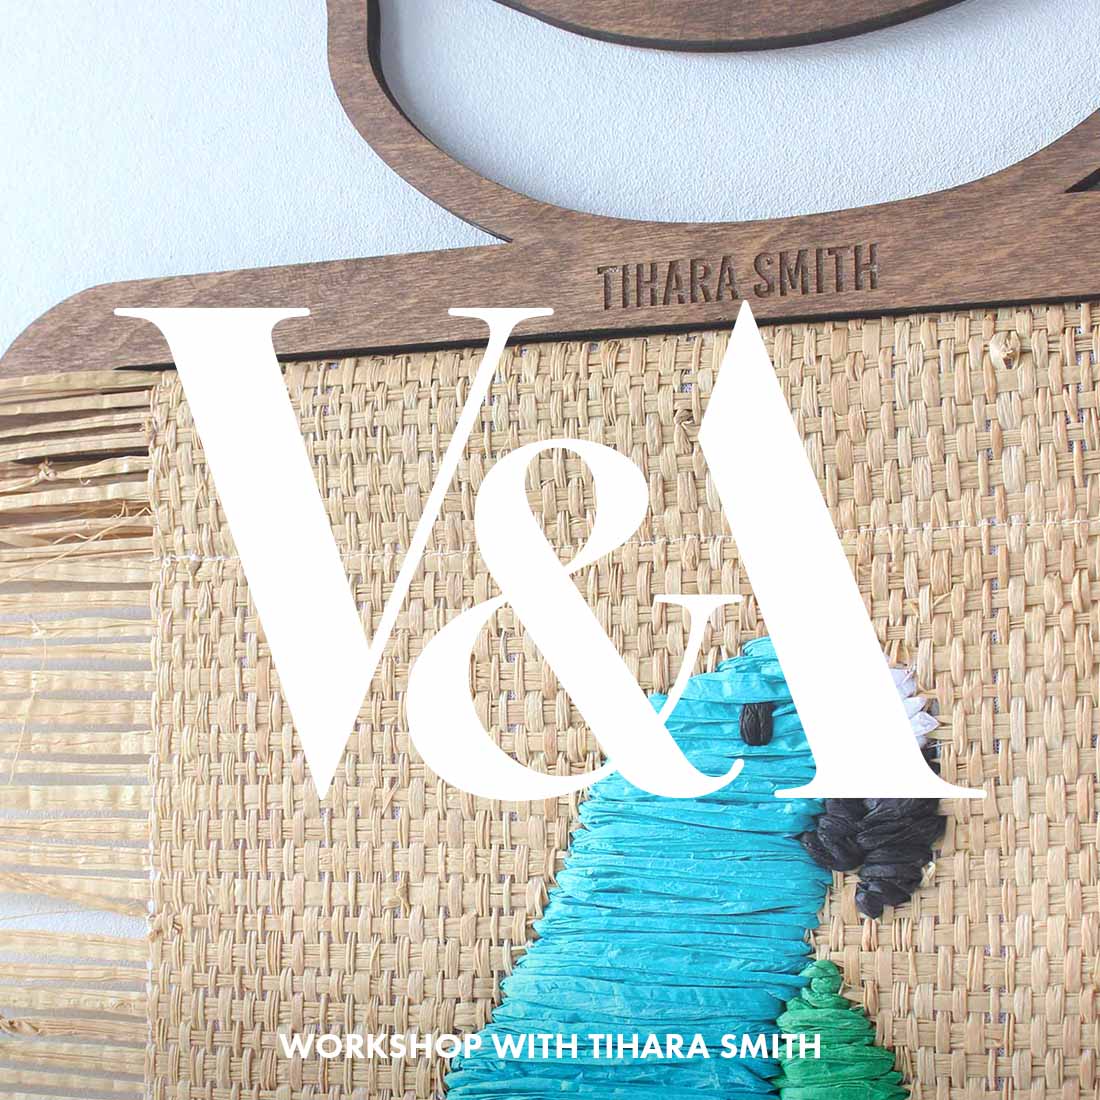 Image for the Tihara Smith workshop at the V&A